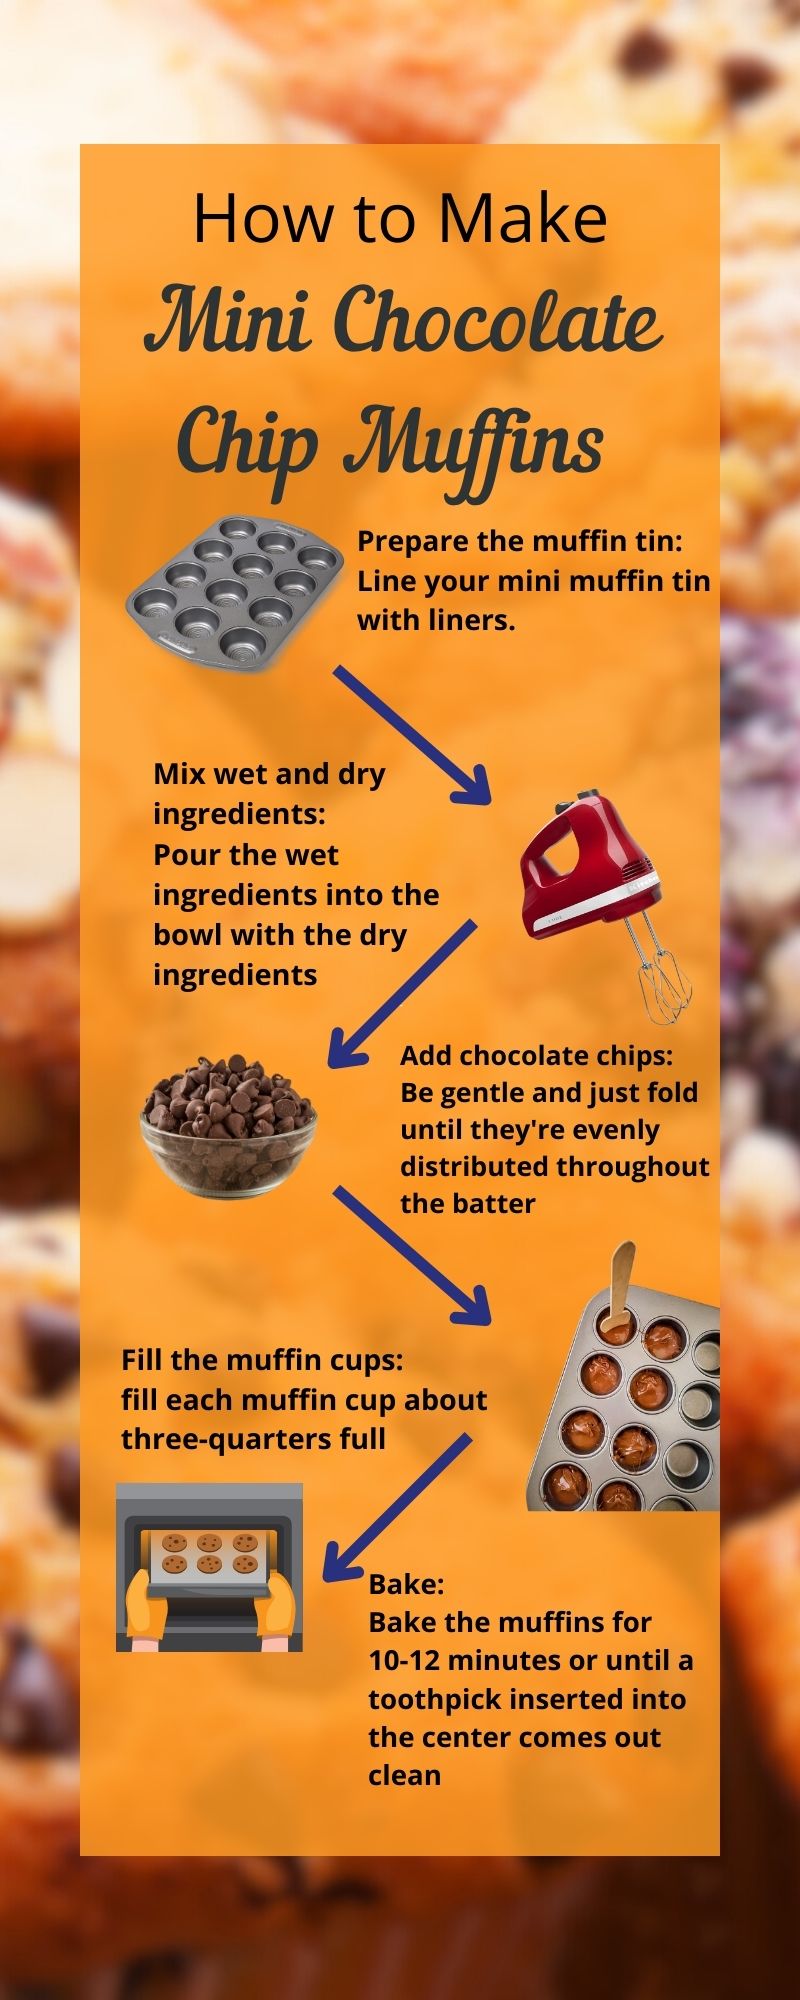 How to Make Chocolate Chip Muffins